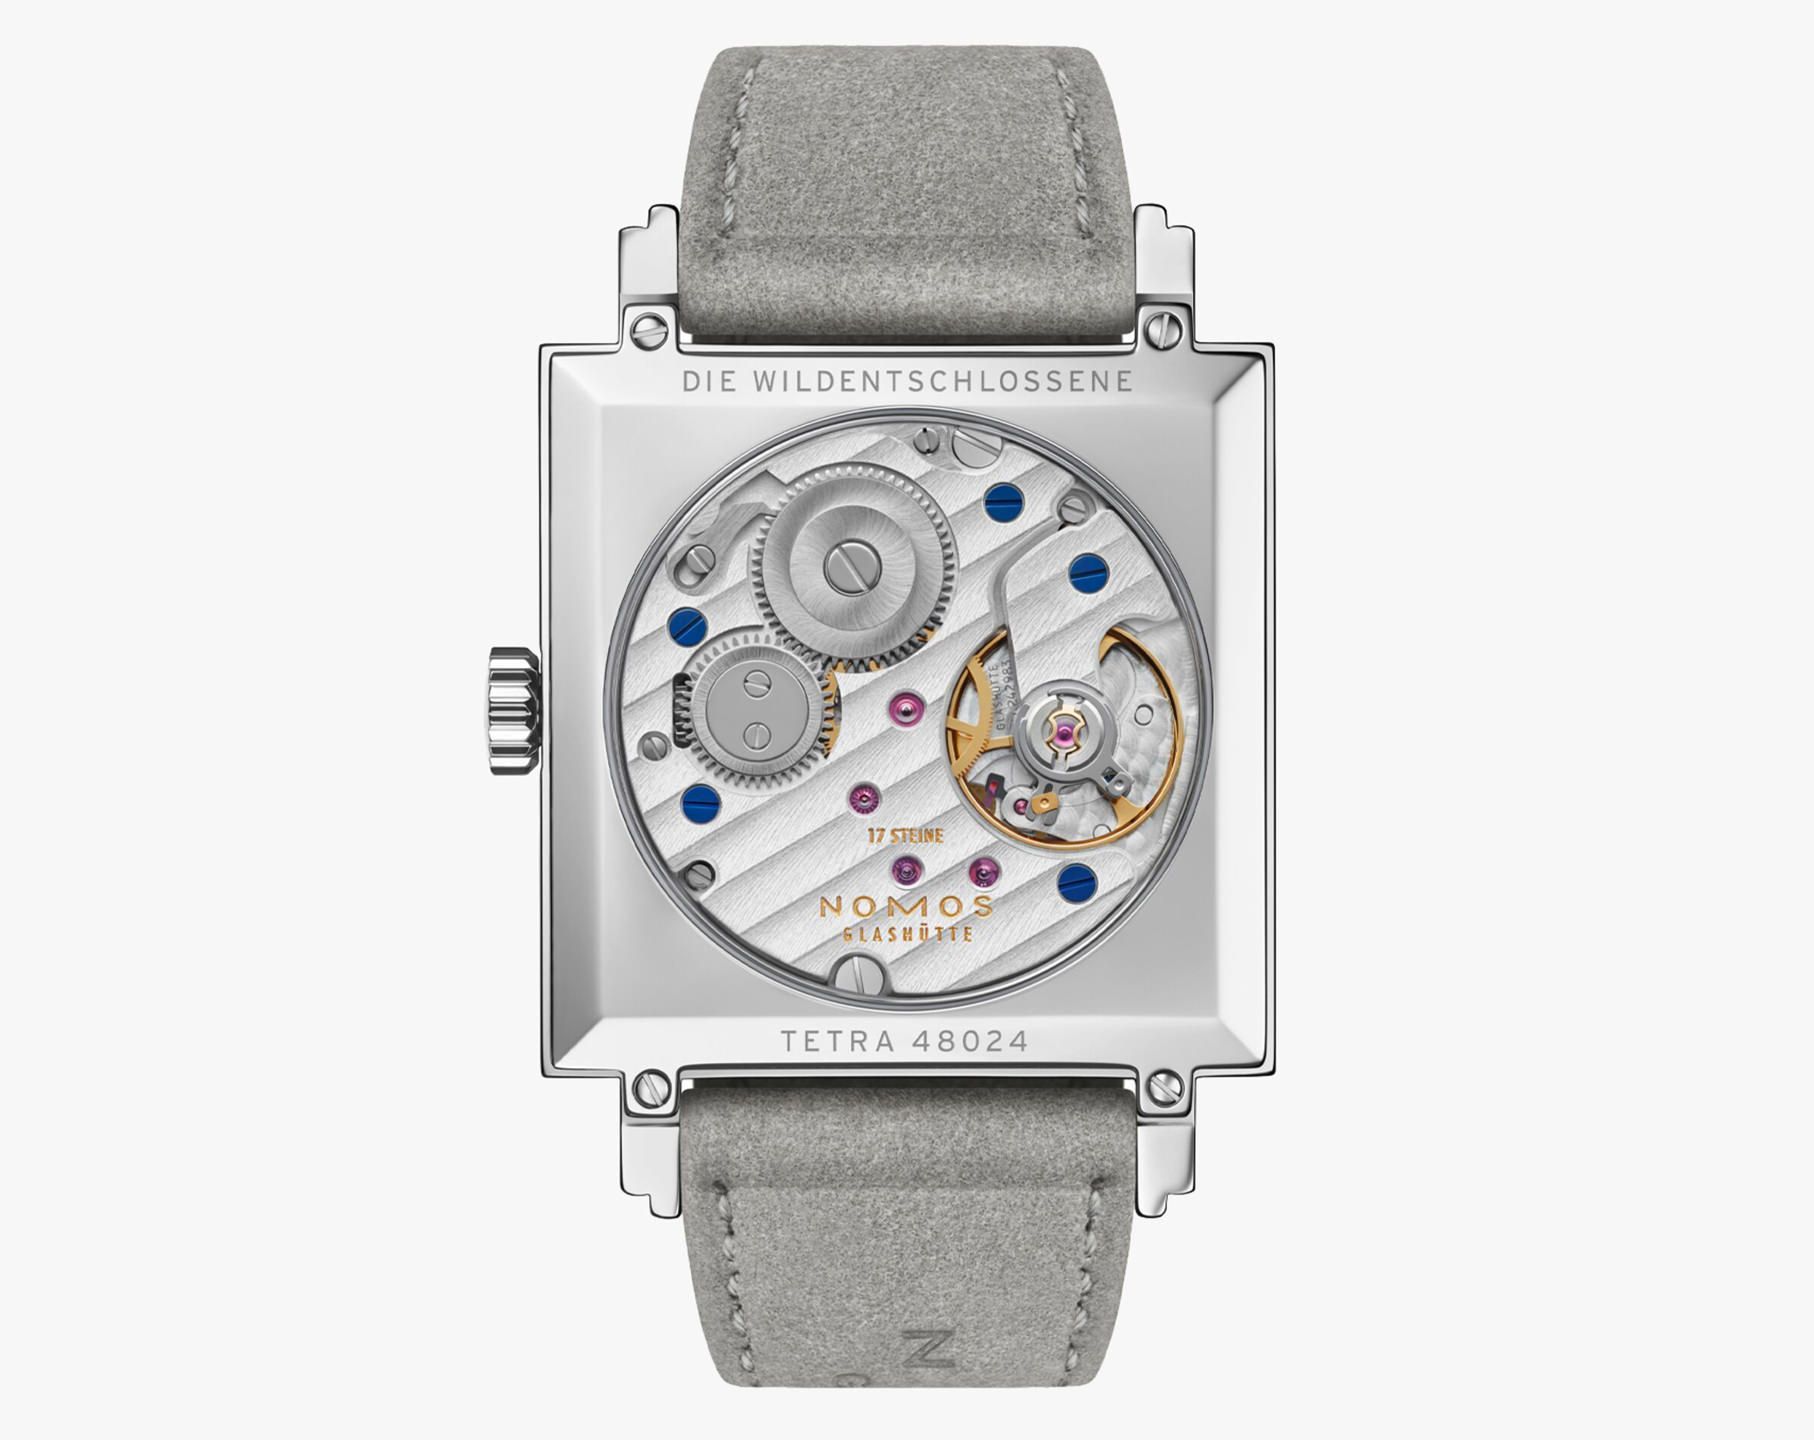 Nomos Glashutte Tetra  Silver Dial 29.5 mm Manual Winding Watch For Unisex - 2